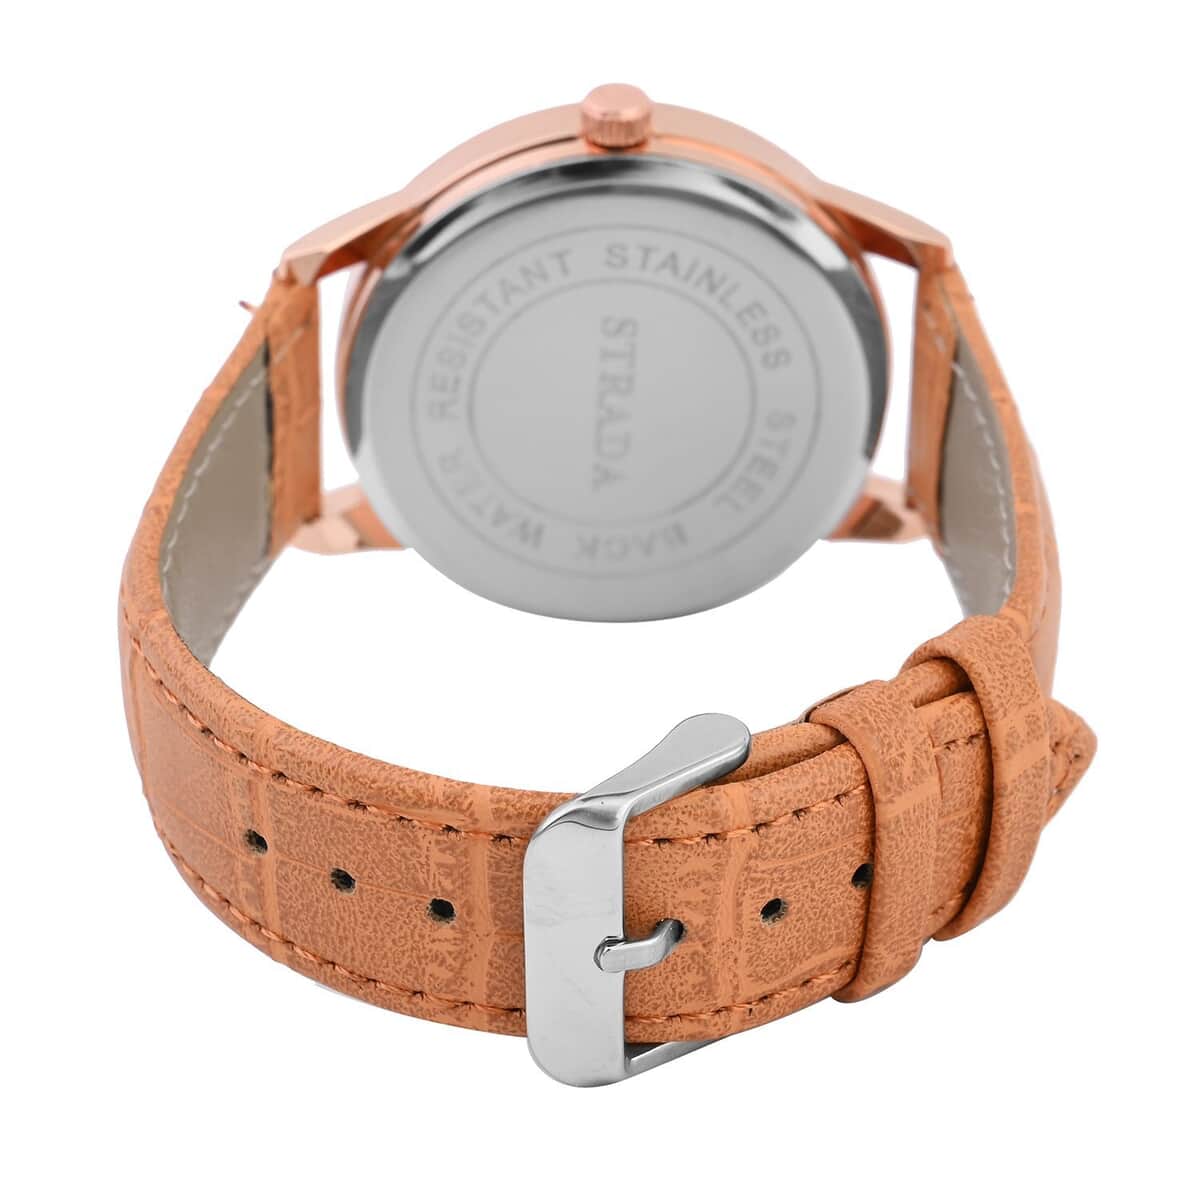 Strada Japanese Movement Watch in Rosetone with Orange Faux Leather Strap (40.65mm) (5.75-7.75 Inches) image number 5